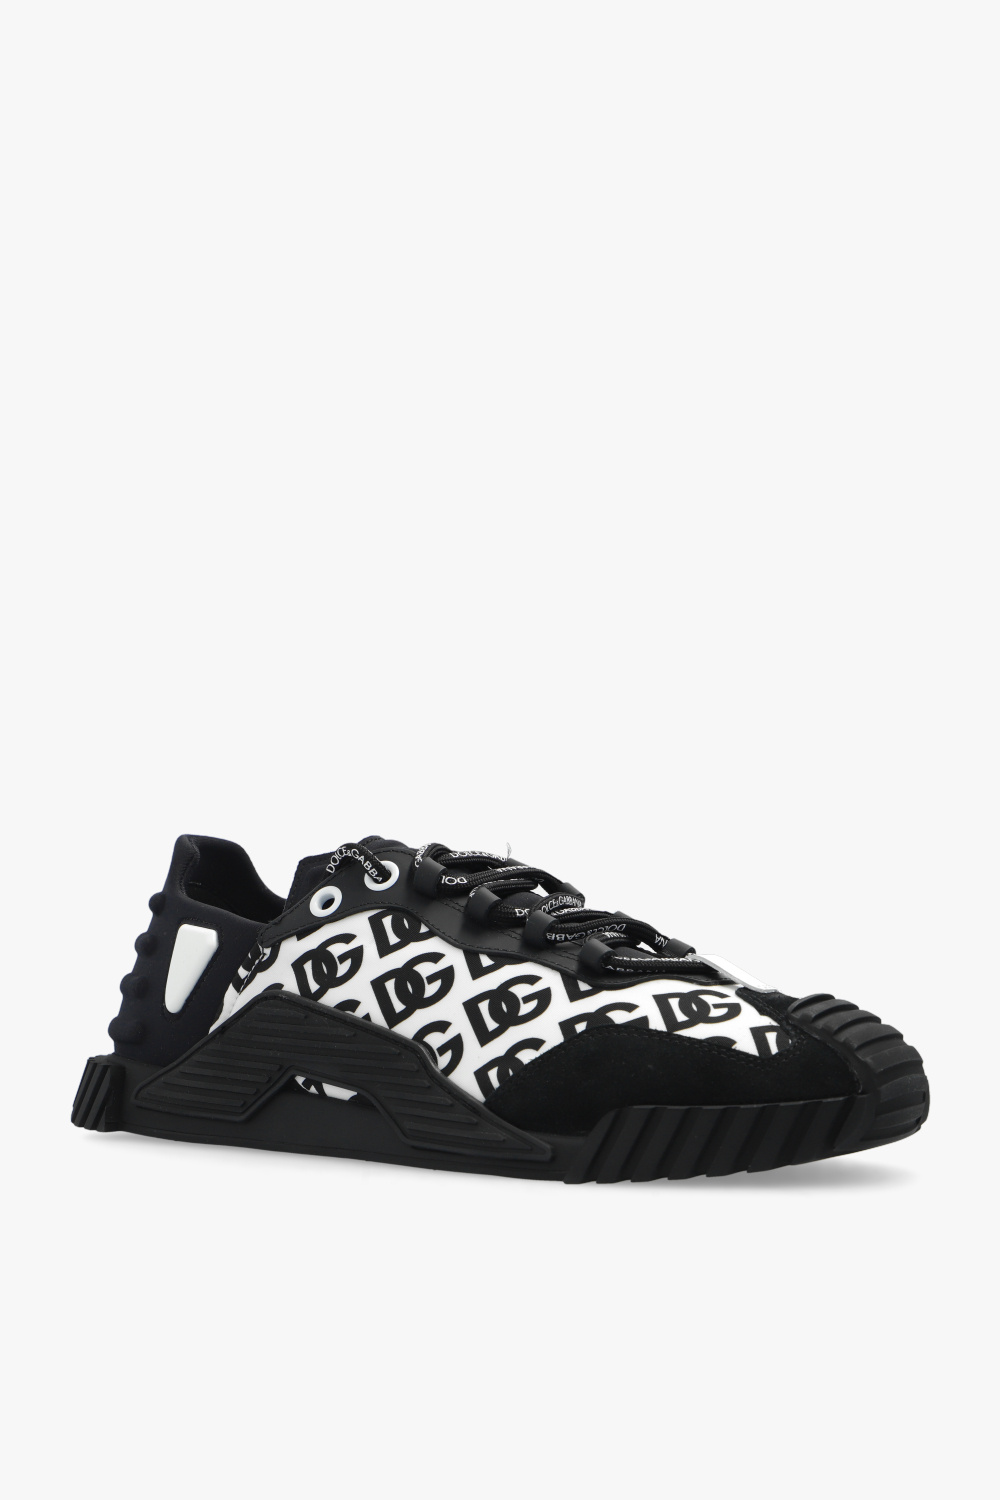 dolce cotton & Gabbana Monogrammed sneakers